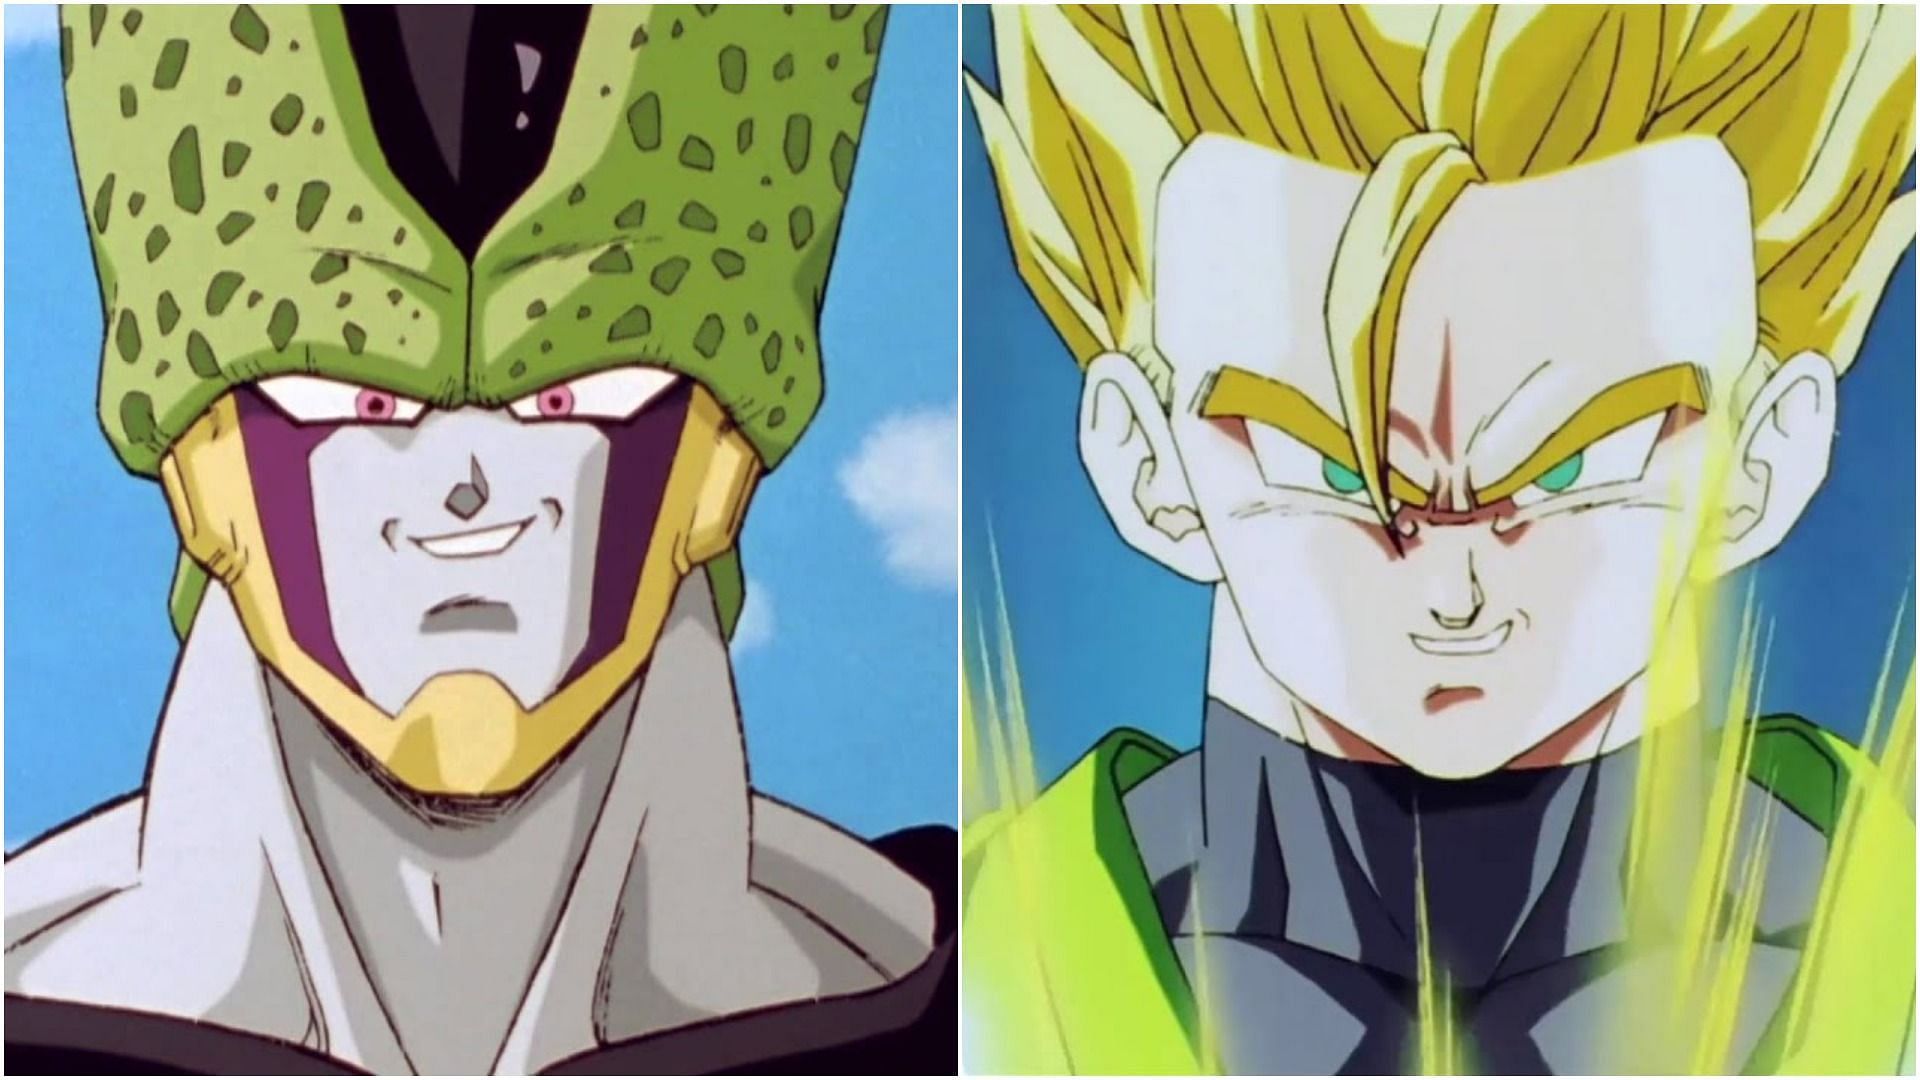 Gohan's Super Hero Final Move Is A Perfect Dragon Ball Callback In 3 Ways